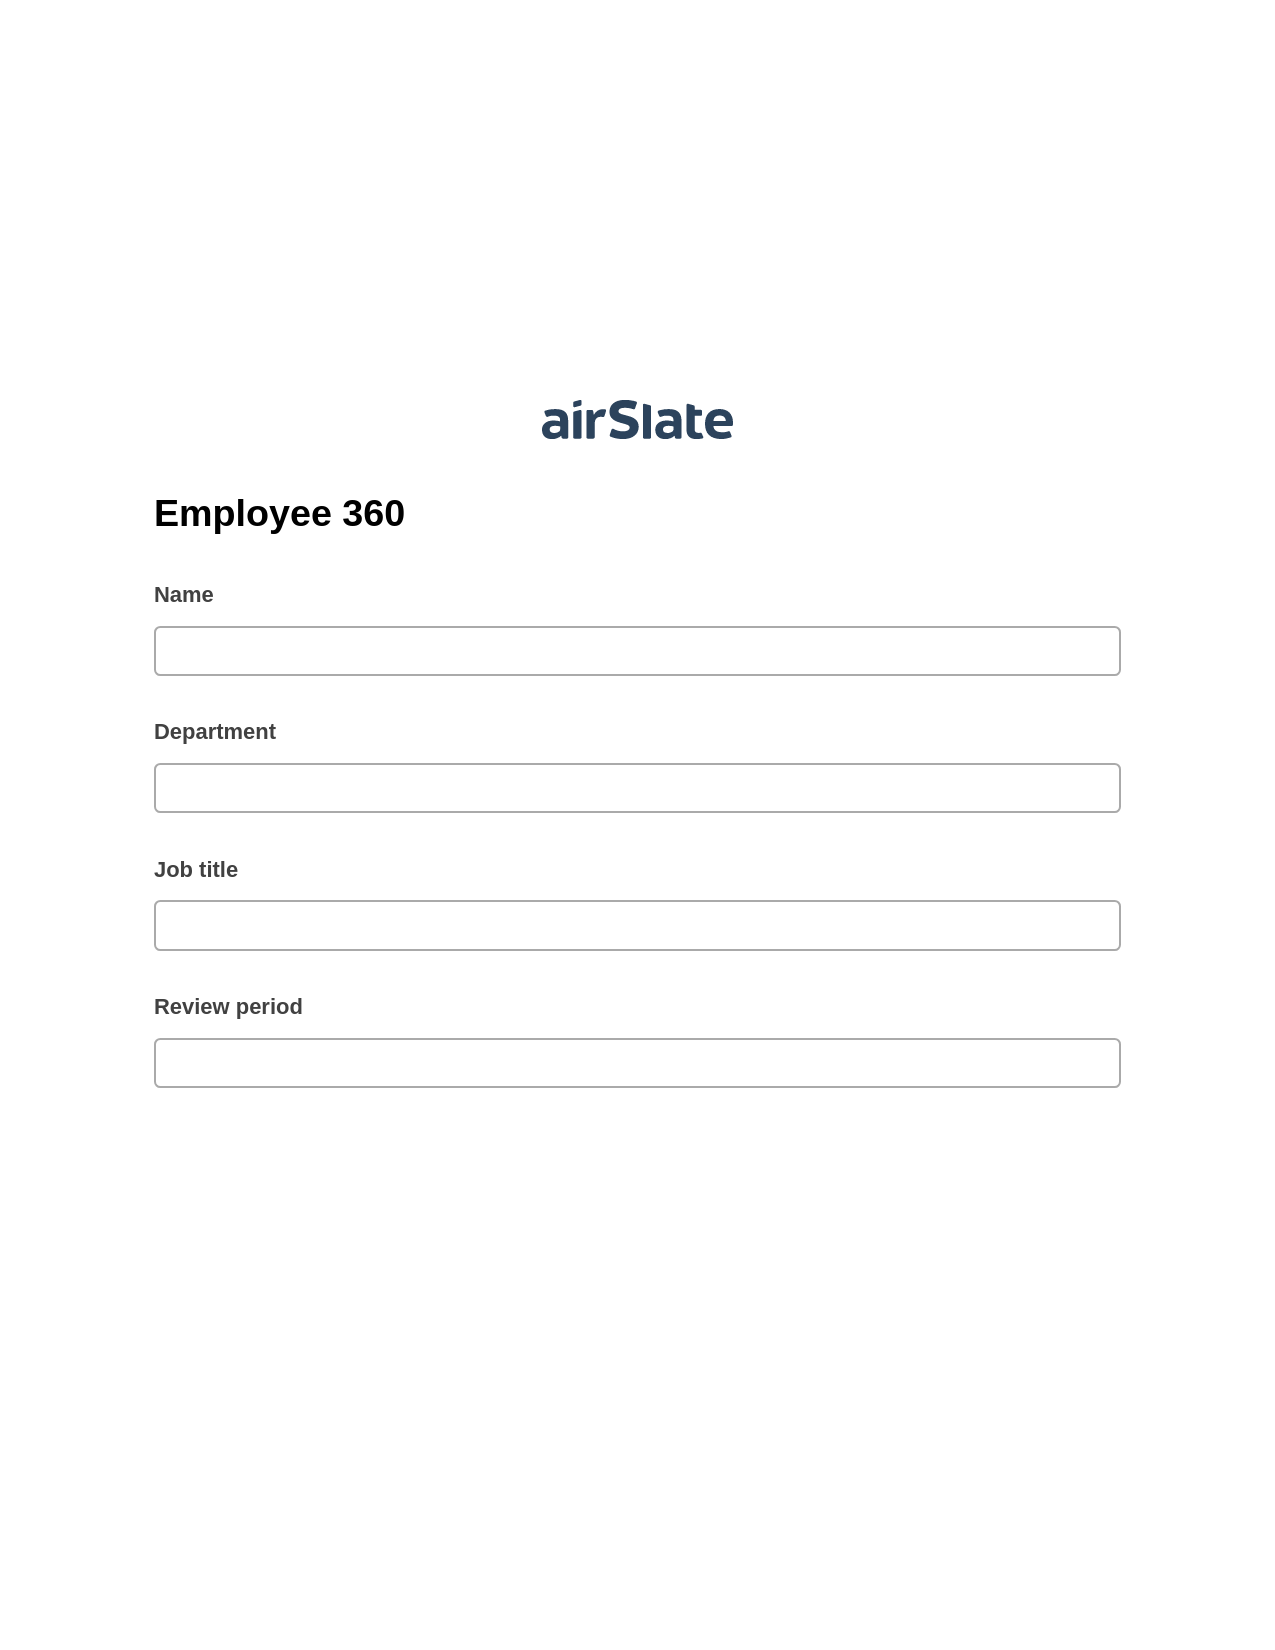 Employee 360 Pre-fill Document Bot, Export to MS Dynamics 365 Bot, Archive to Box Bot